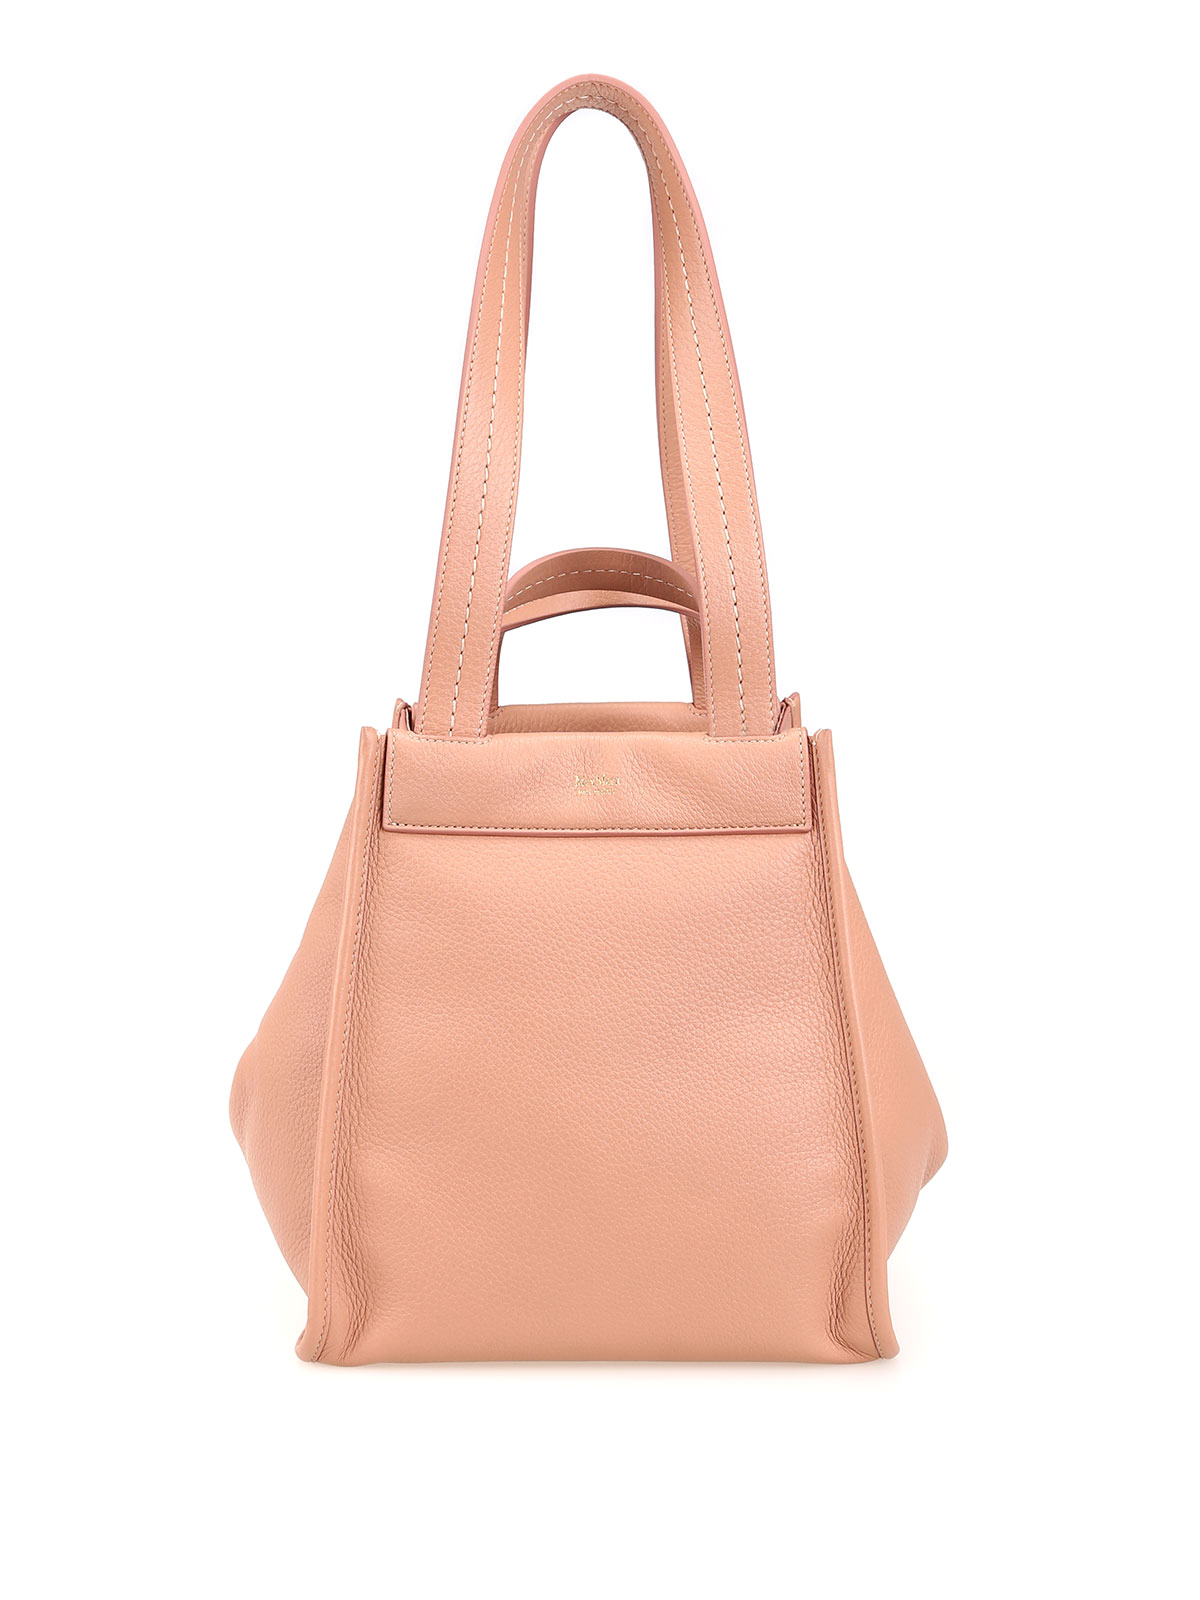 Totes bags Max Mara - Sophie pebbled leather reversible tote 